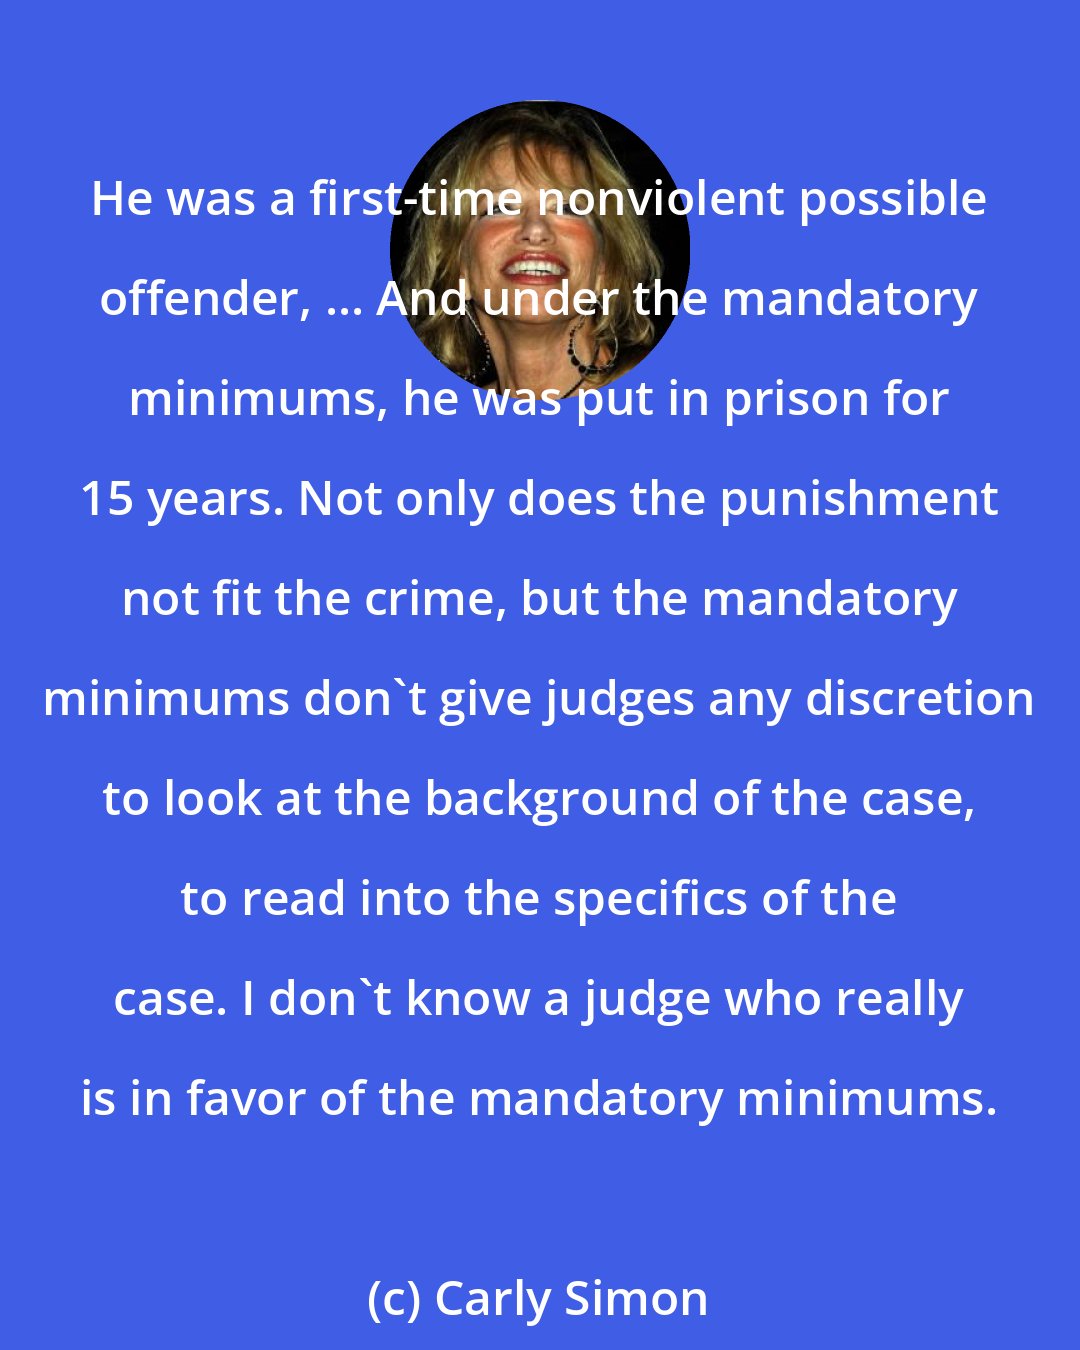 Carly Simon: He was a first-time nonviolent possible offender, ... And under the mandatory minimums, he was put in prison for 15 years. Not only does the punishment not fit the crime, but the mandatory minimums don't give judges any discretion to look at the background of the case, to read into the specifics of the case. I don't know a judge who really is in favor of the mandatory minimums.